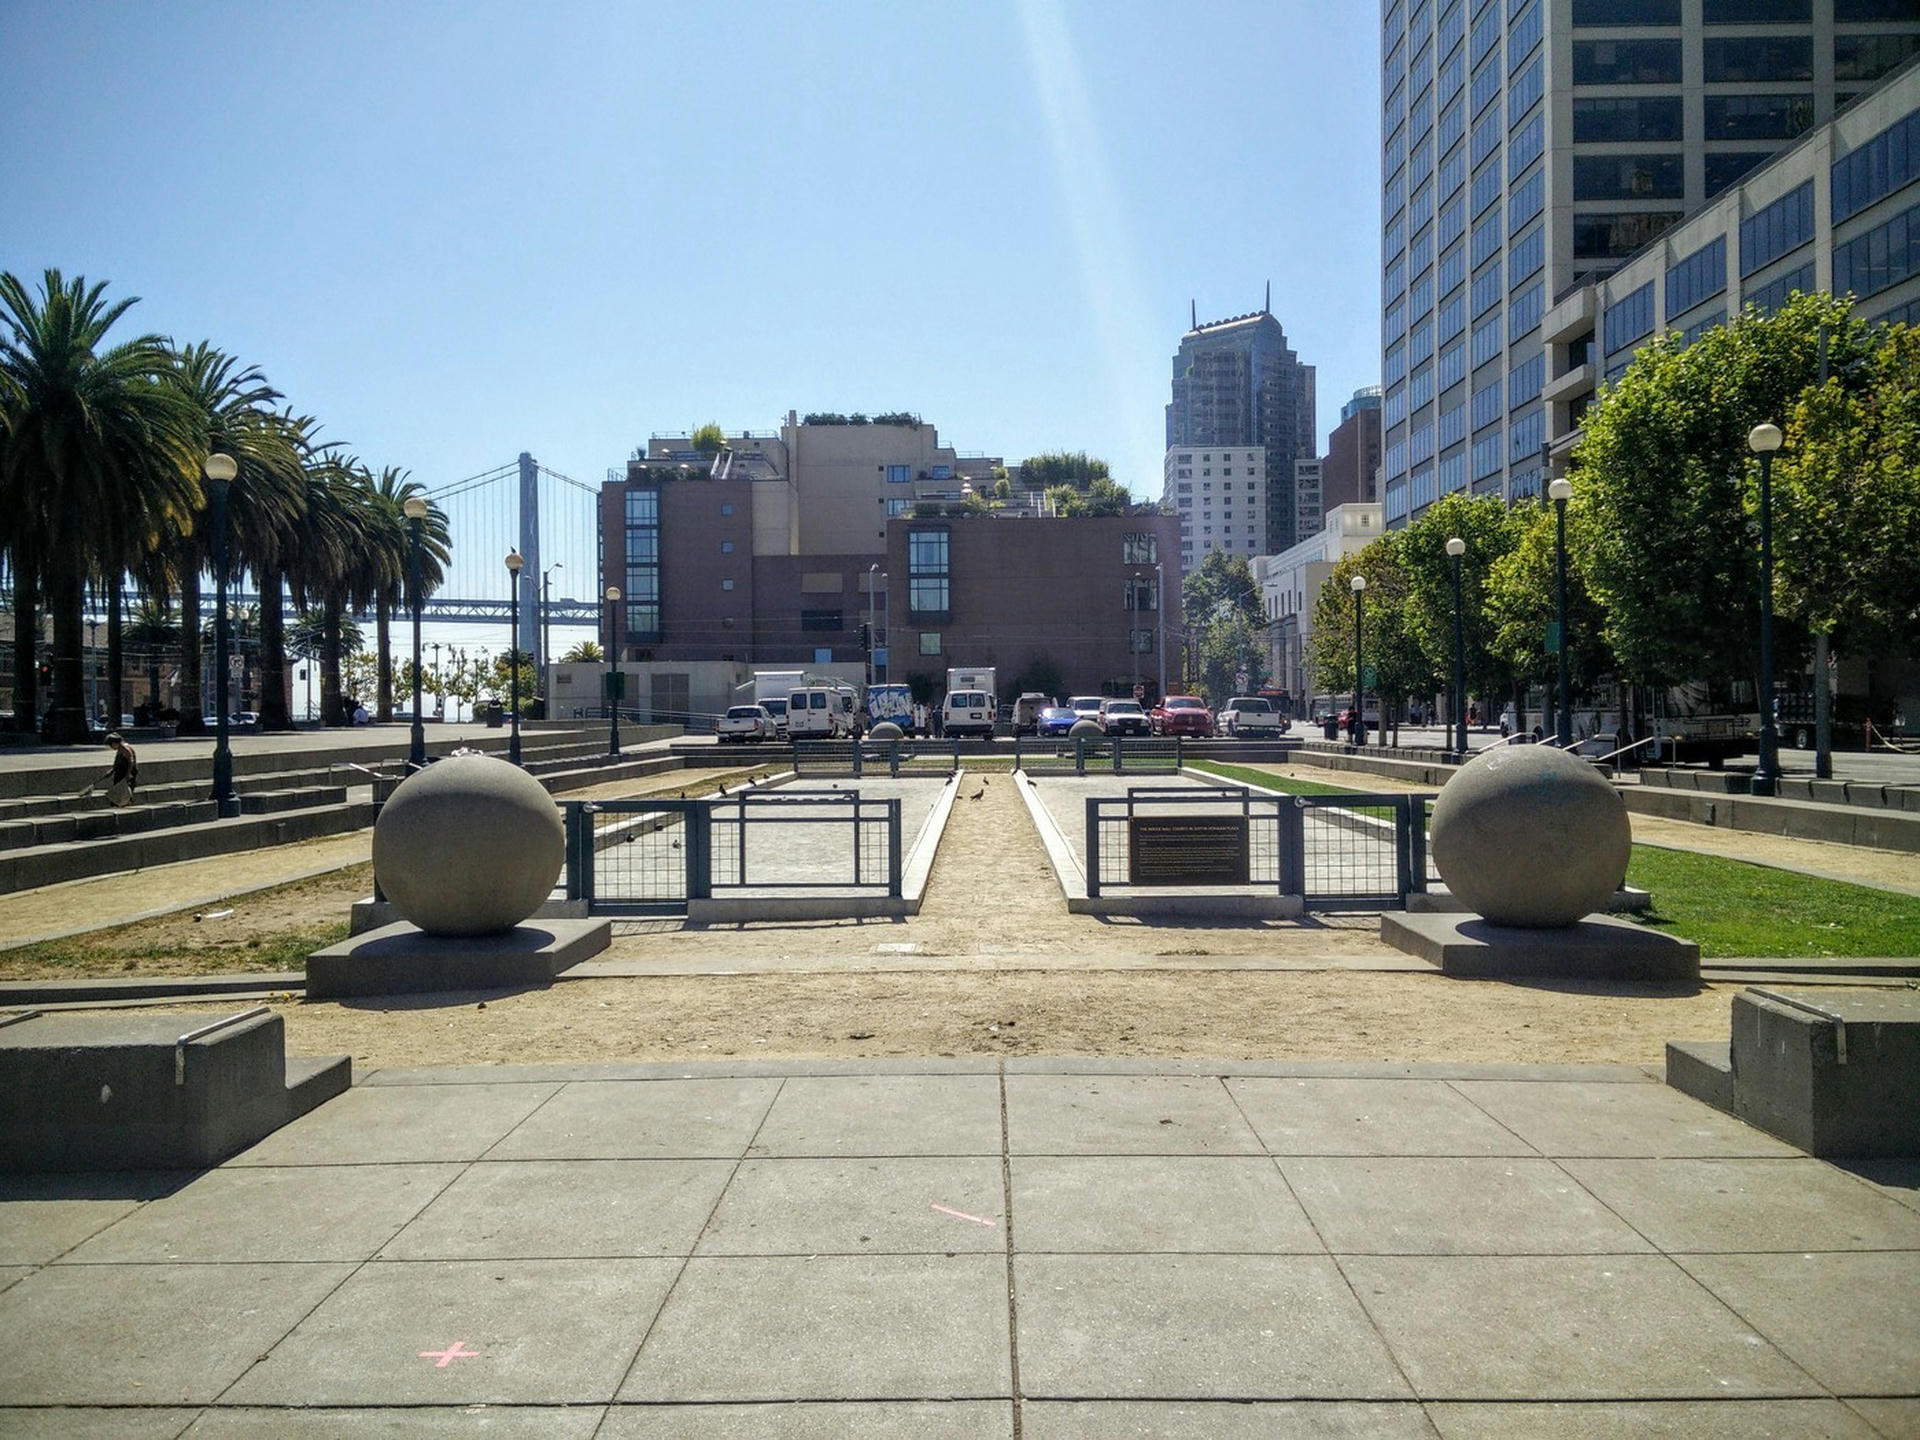 Some open space near the Ferry Building